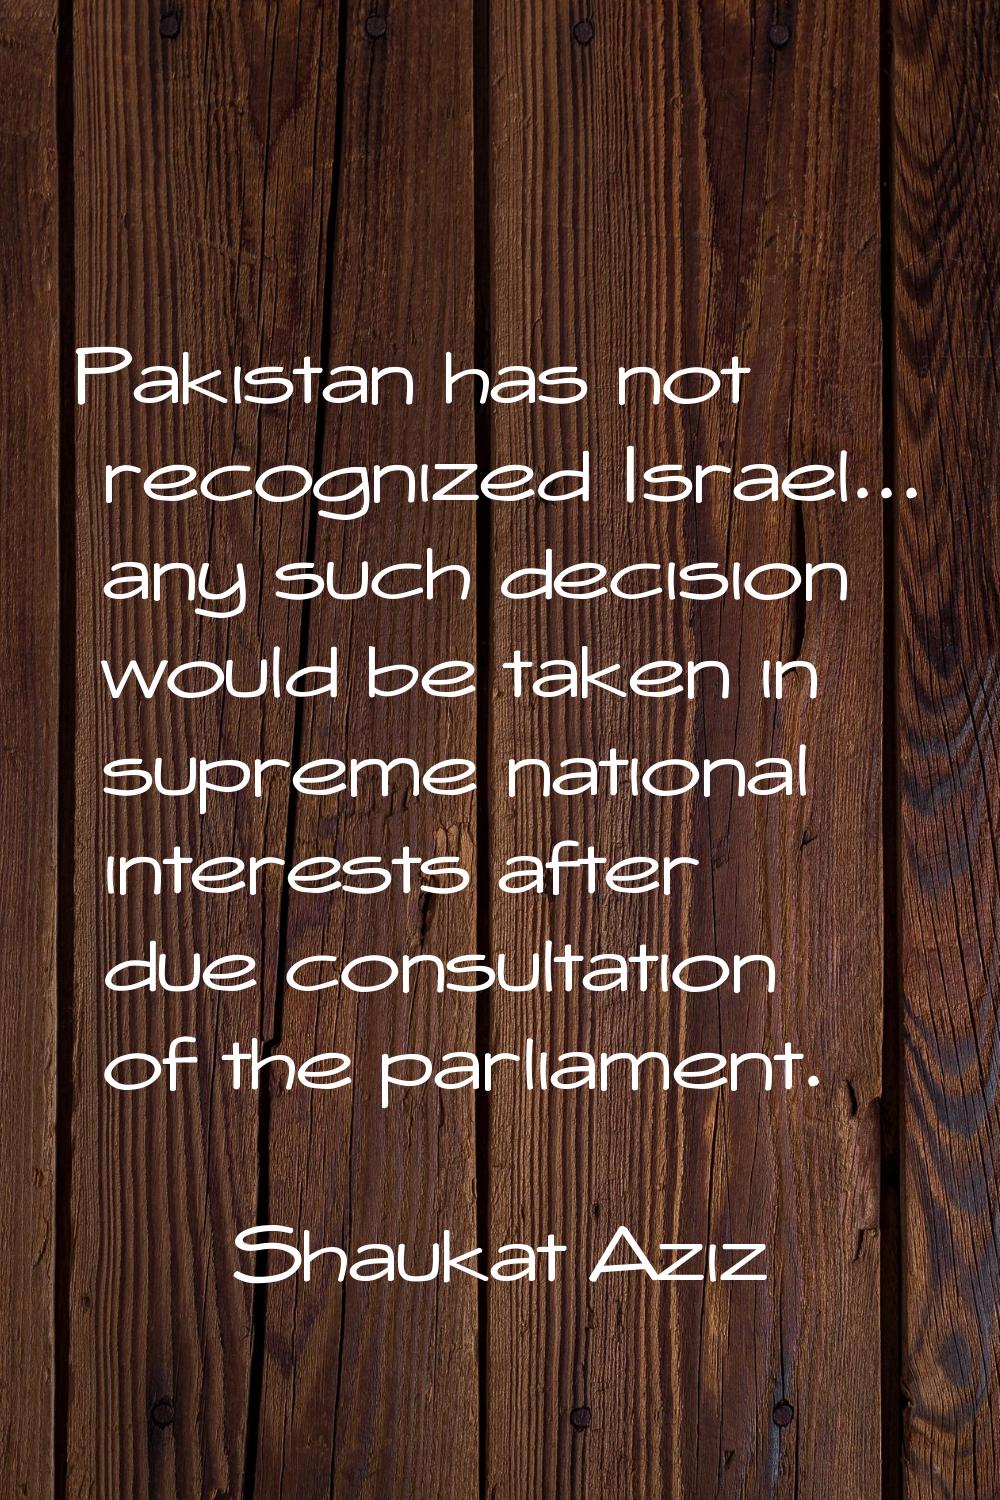 Pakistan has not recognized Israel... any such decision would be taken in supreme national interest